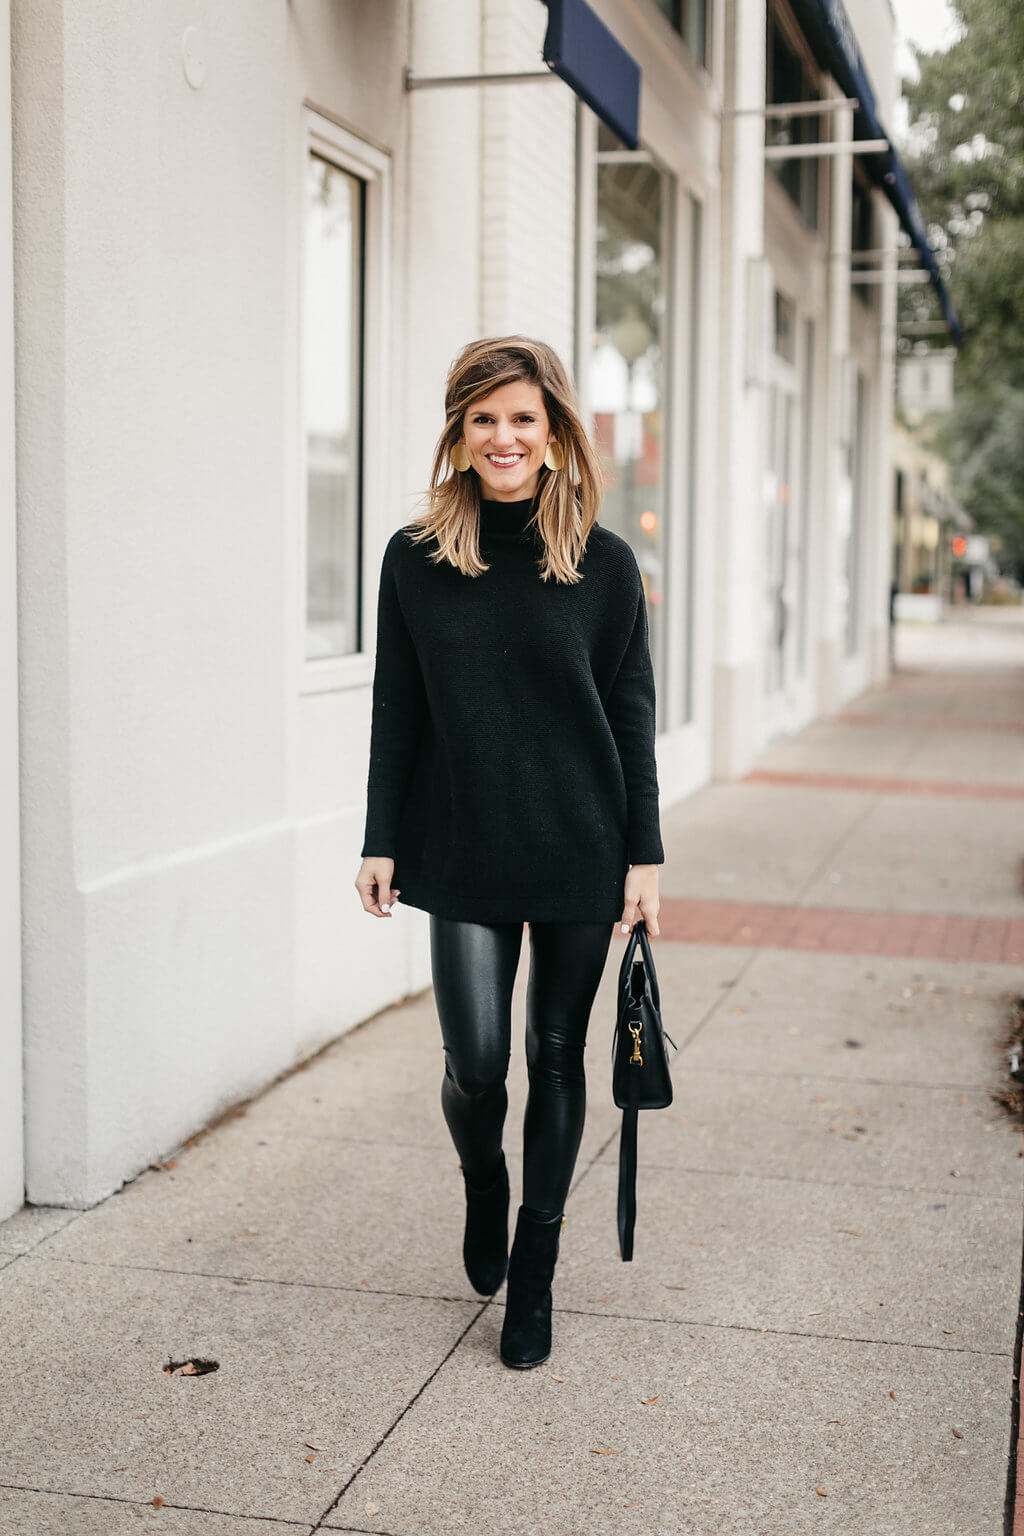 how to wear leather leggings to work